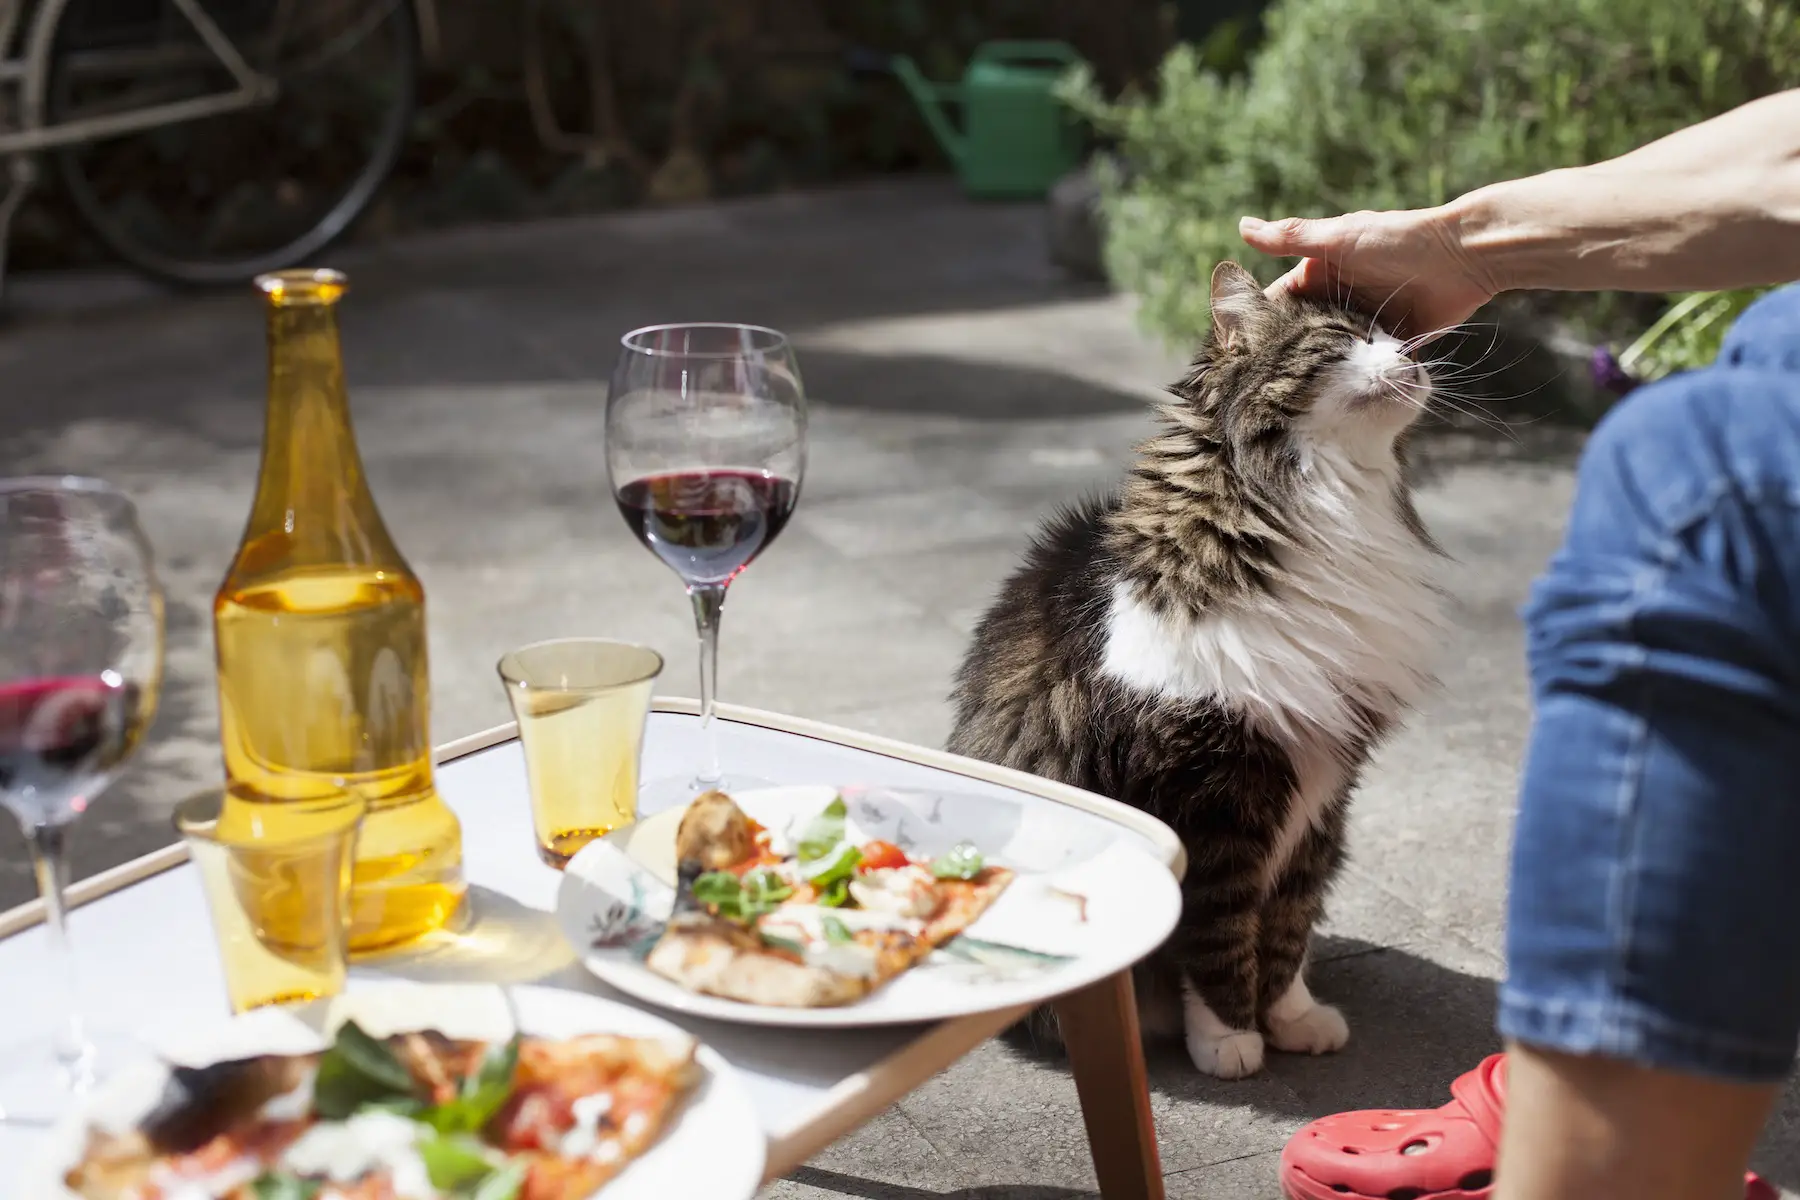 A large, long-haired cat has its head rubbed while sitting on the ground next to a table of pizza and wine